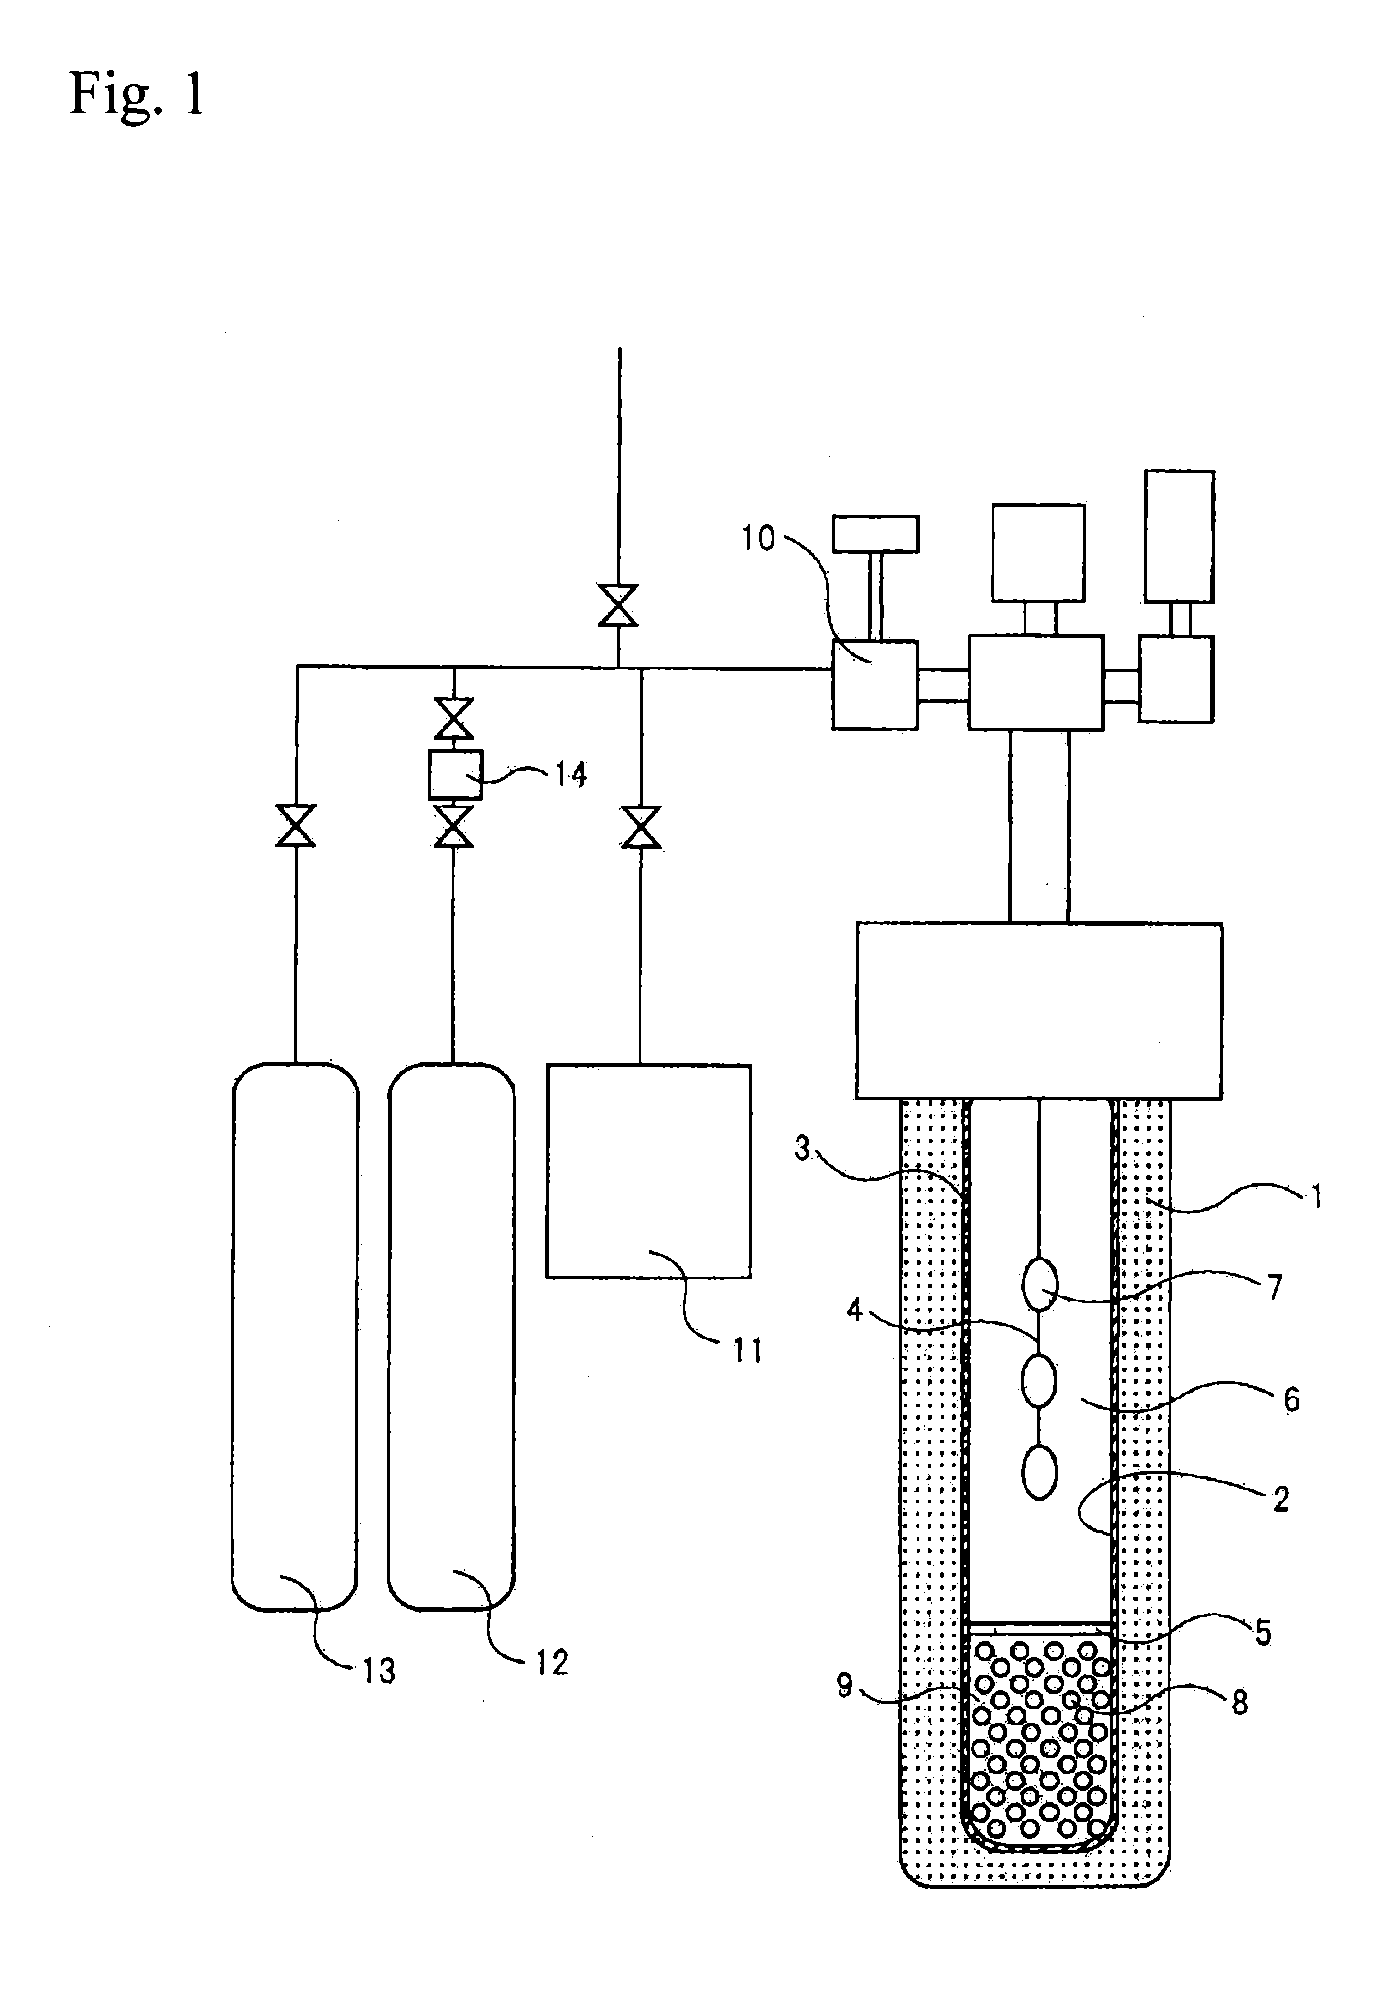 Crystal of nitride of group-13 metal on periodic table, and method for producing the same